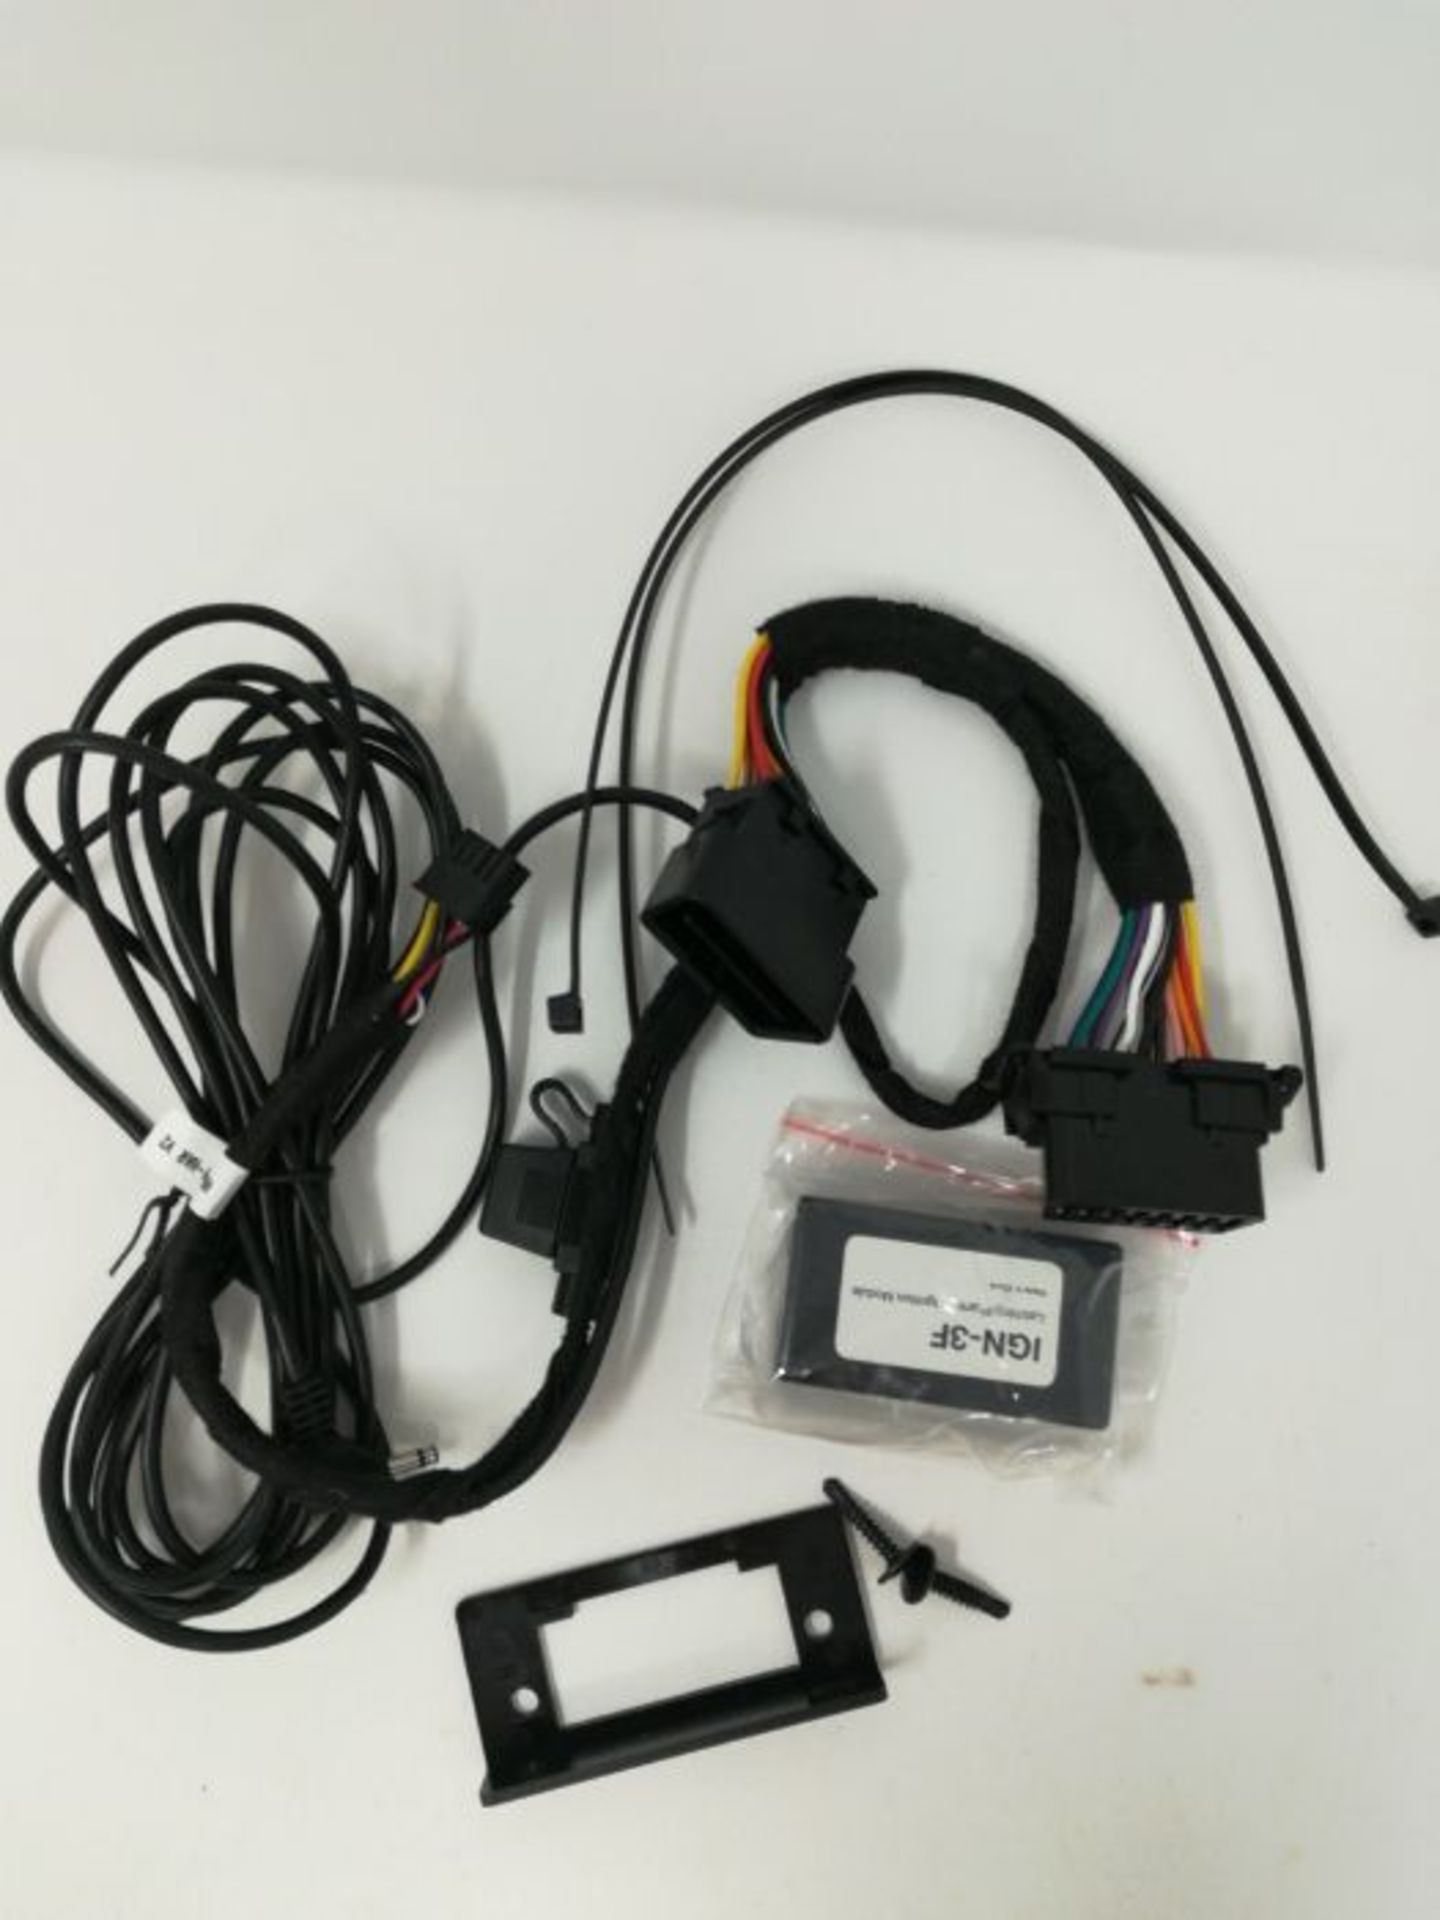 Thinkware OBD Installation Cable for Use On U1000, Q800pro, F800pro, F770, X700, F200, - Image 2 of 2